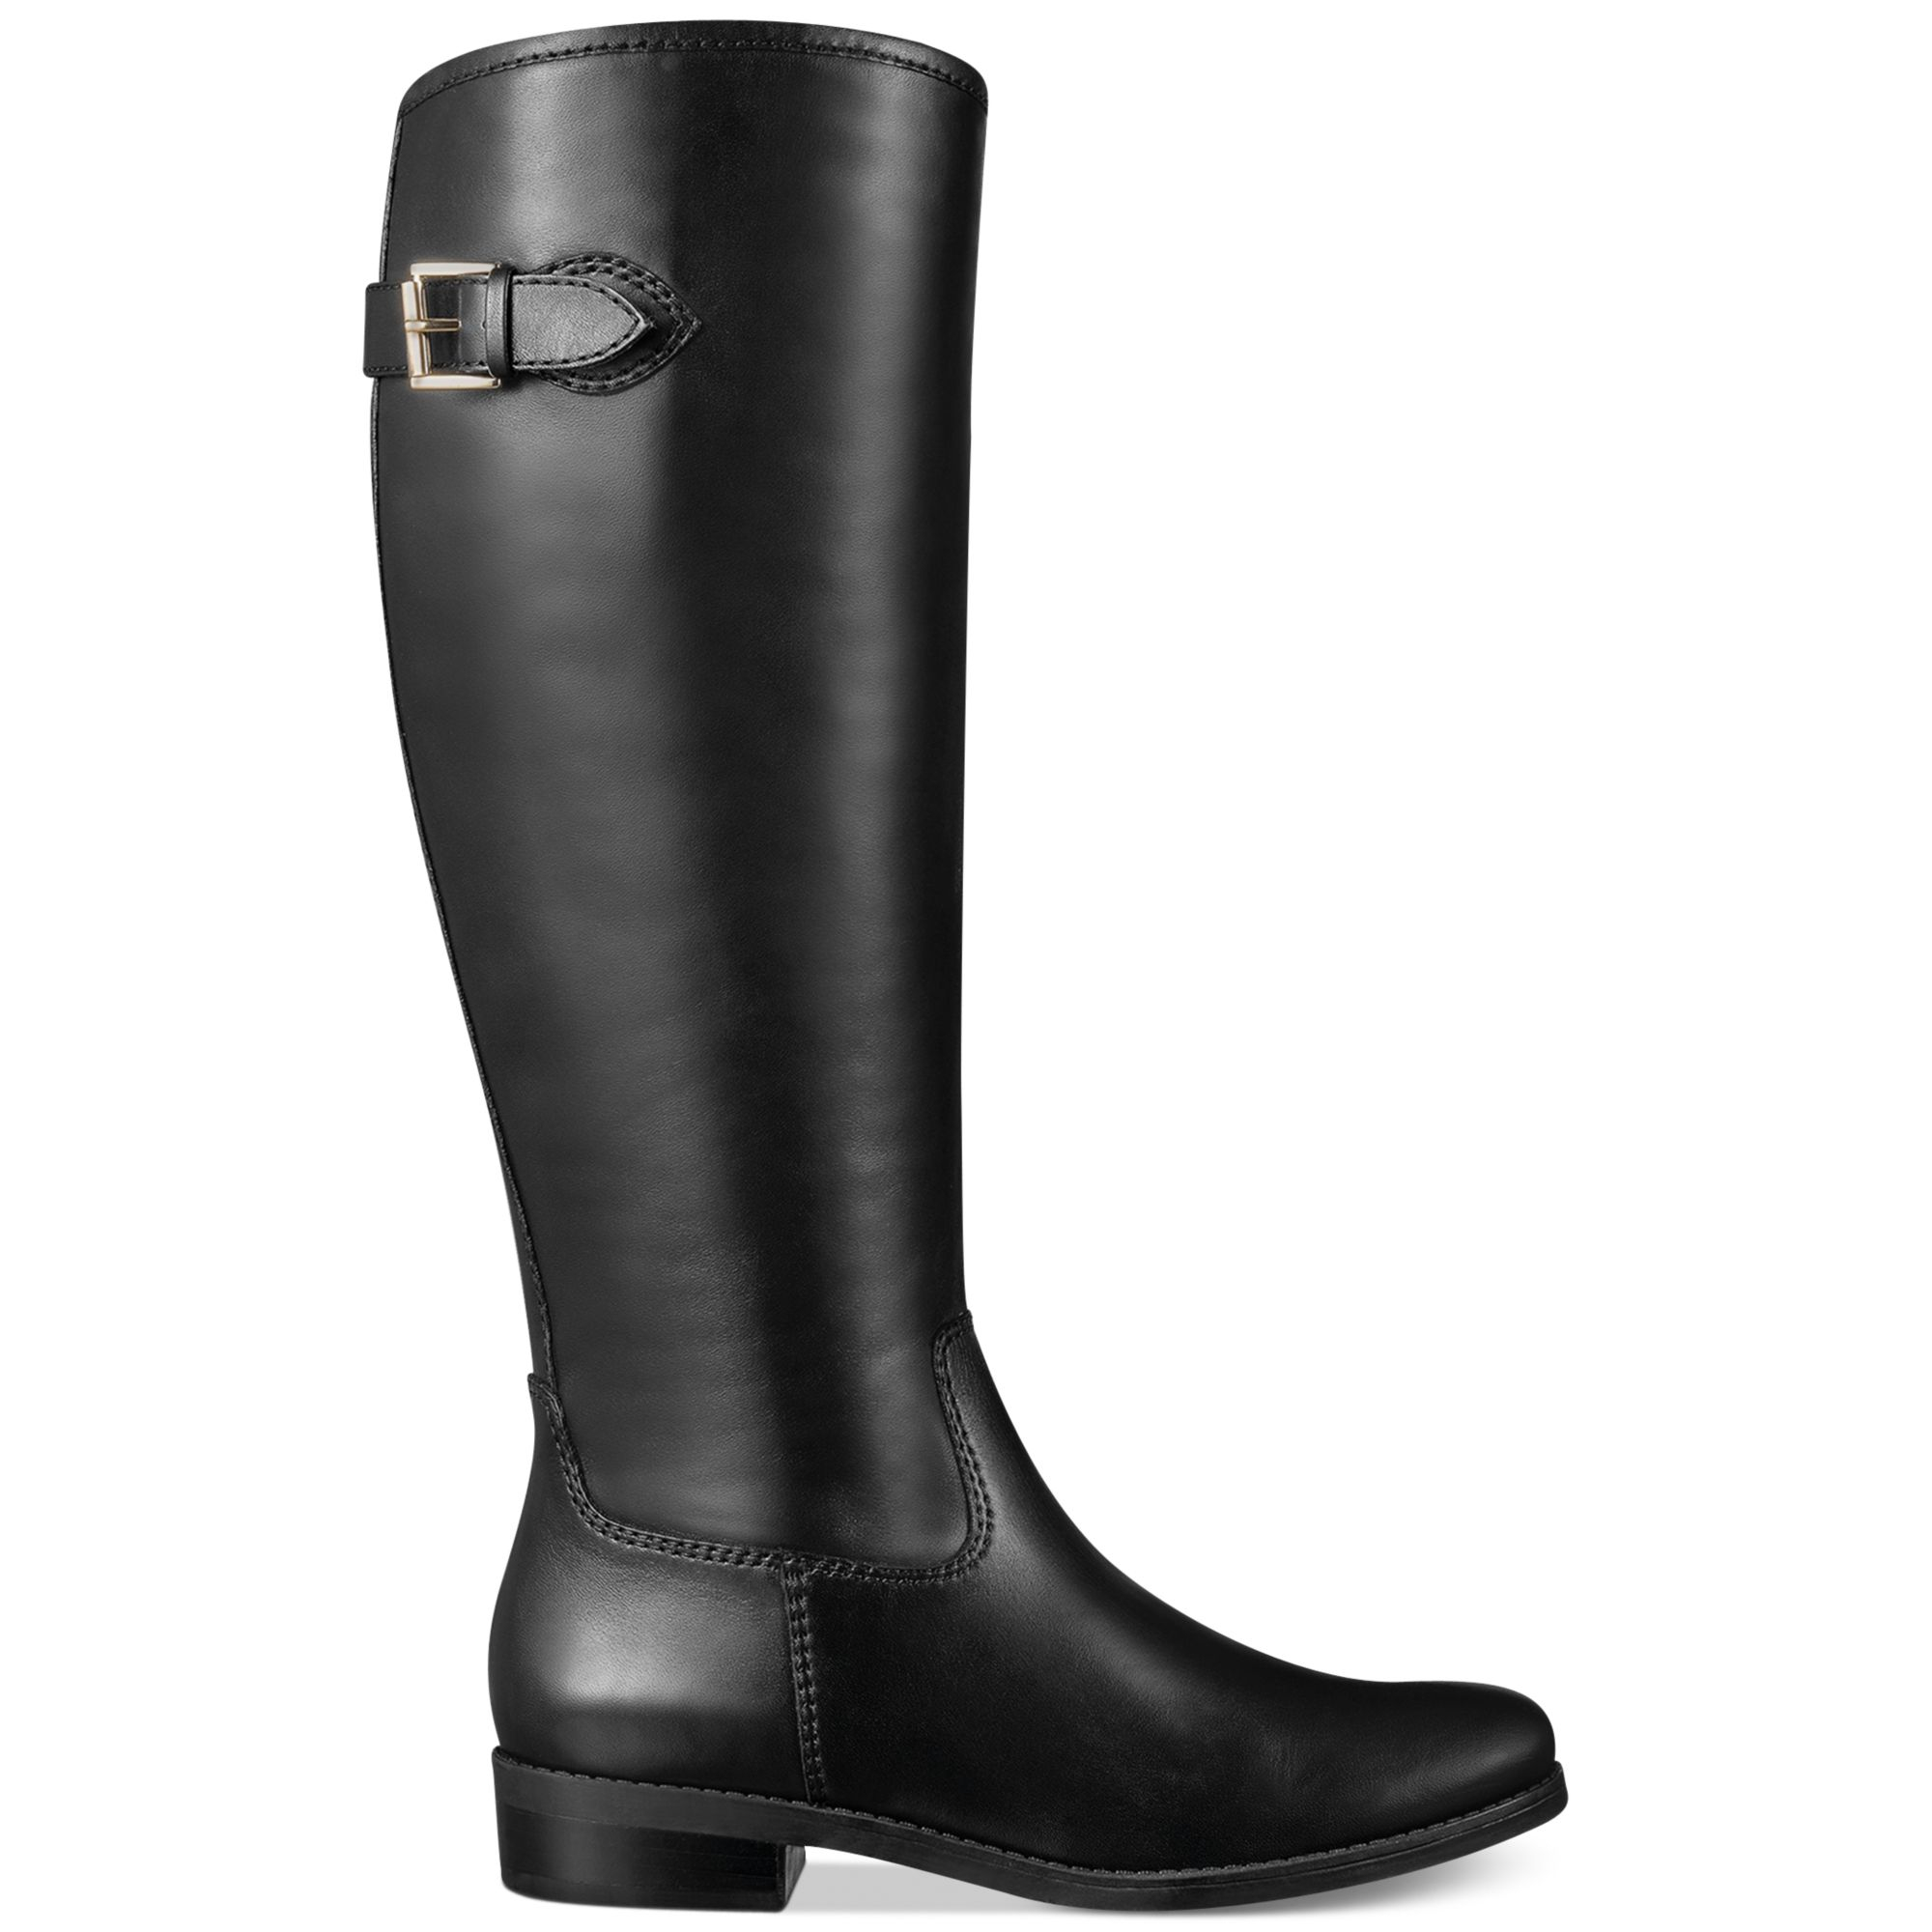 Tommy Hilfiger Dexter2 Wide Calf Tall Riding Boots in Black - Lyst